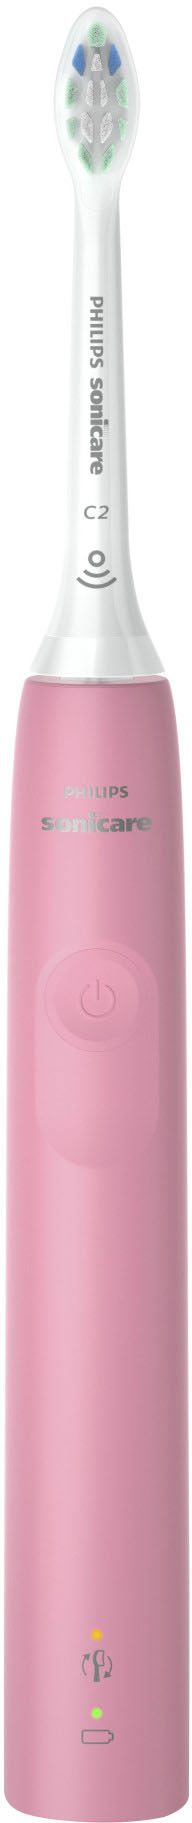 Left View: Philips Sonicare - 4100 Power Toothbrush - Deep Pink